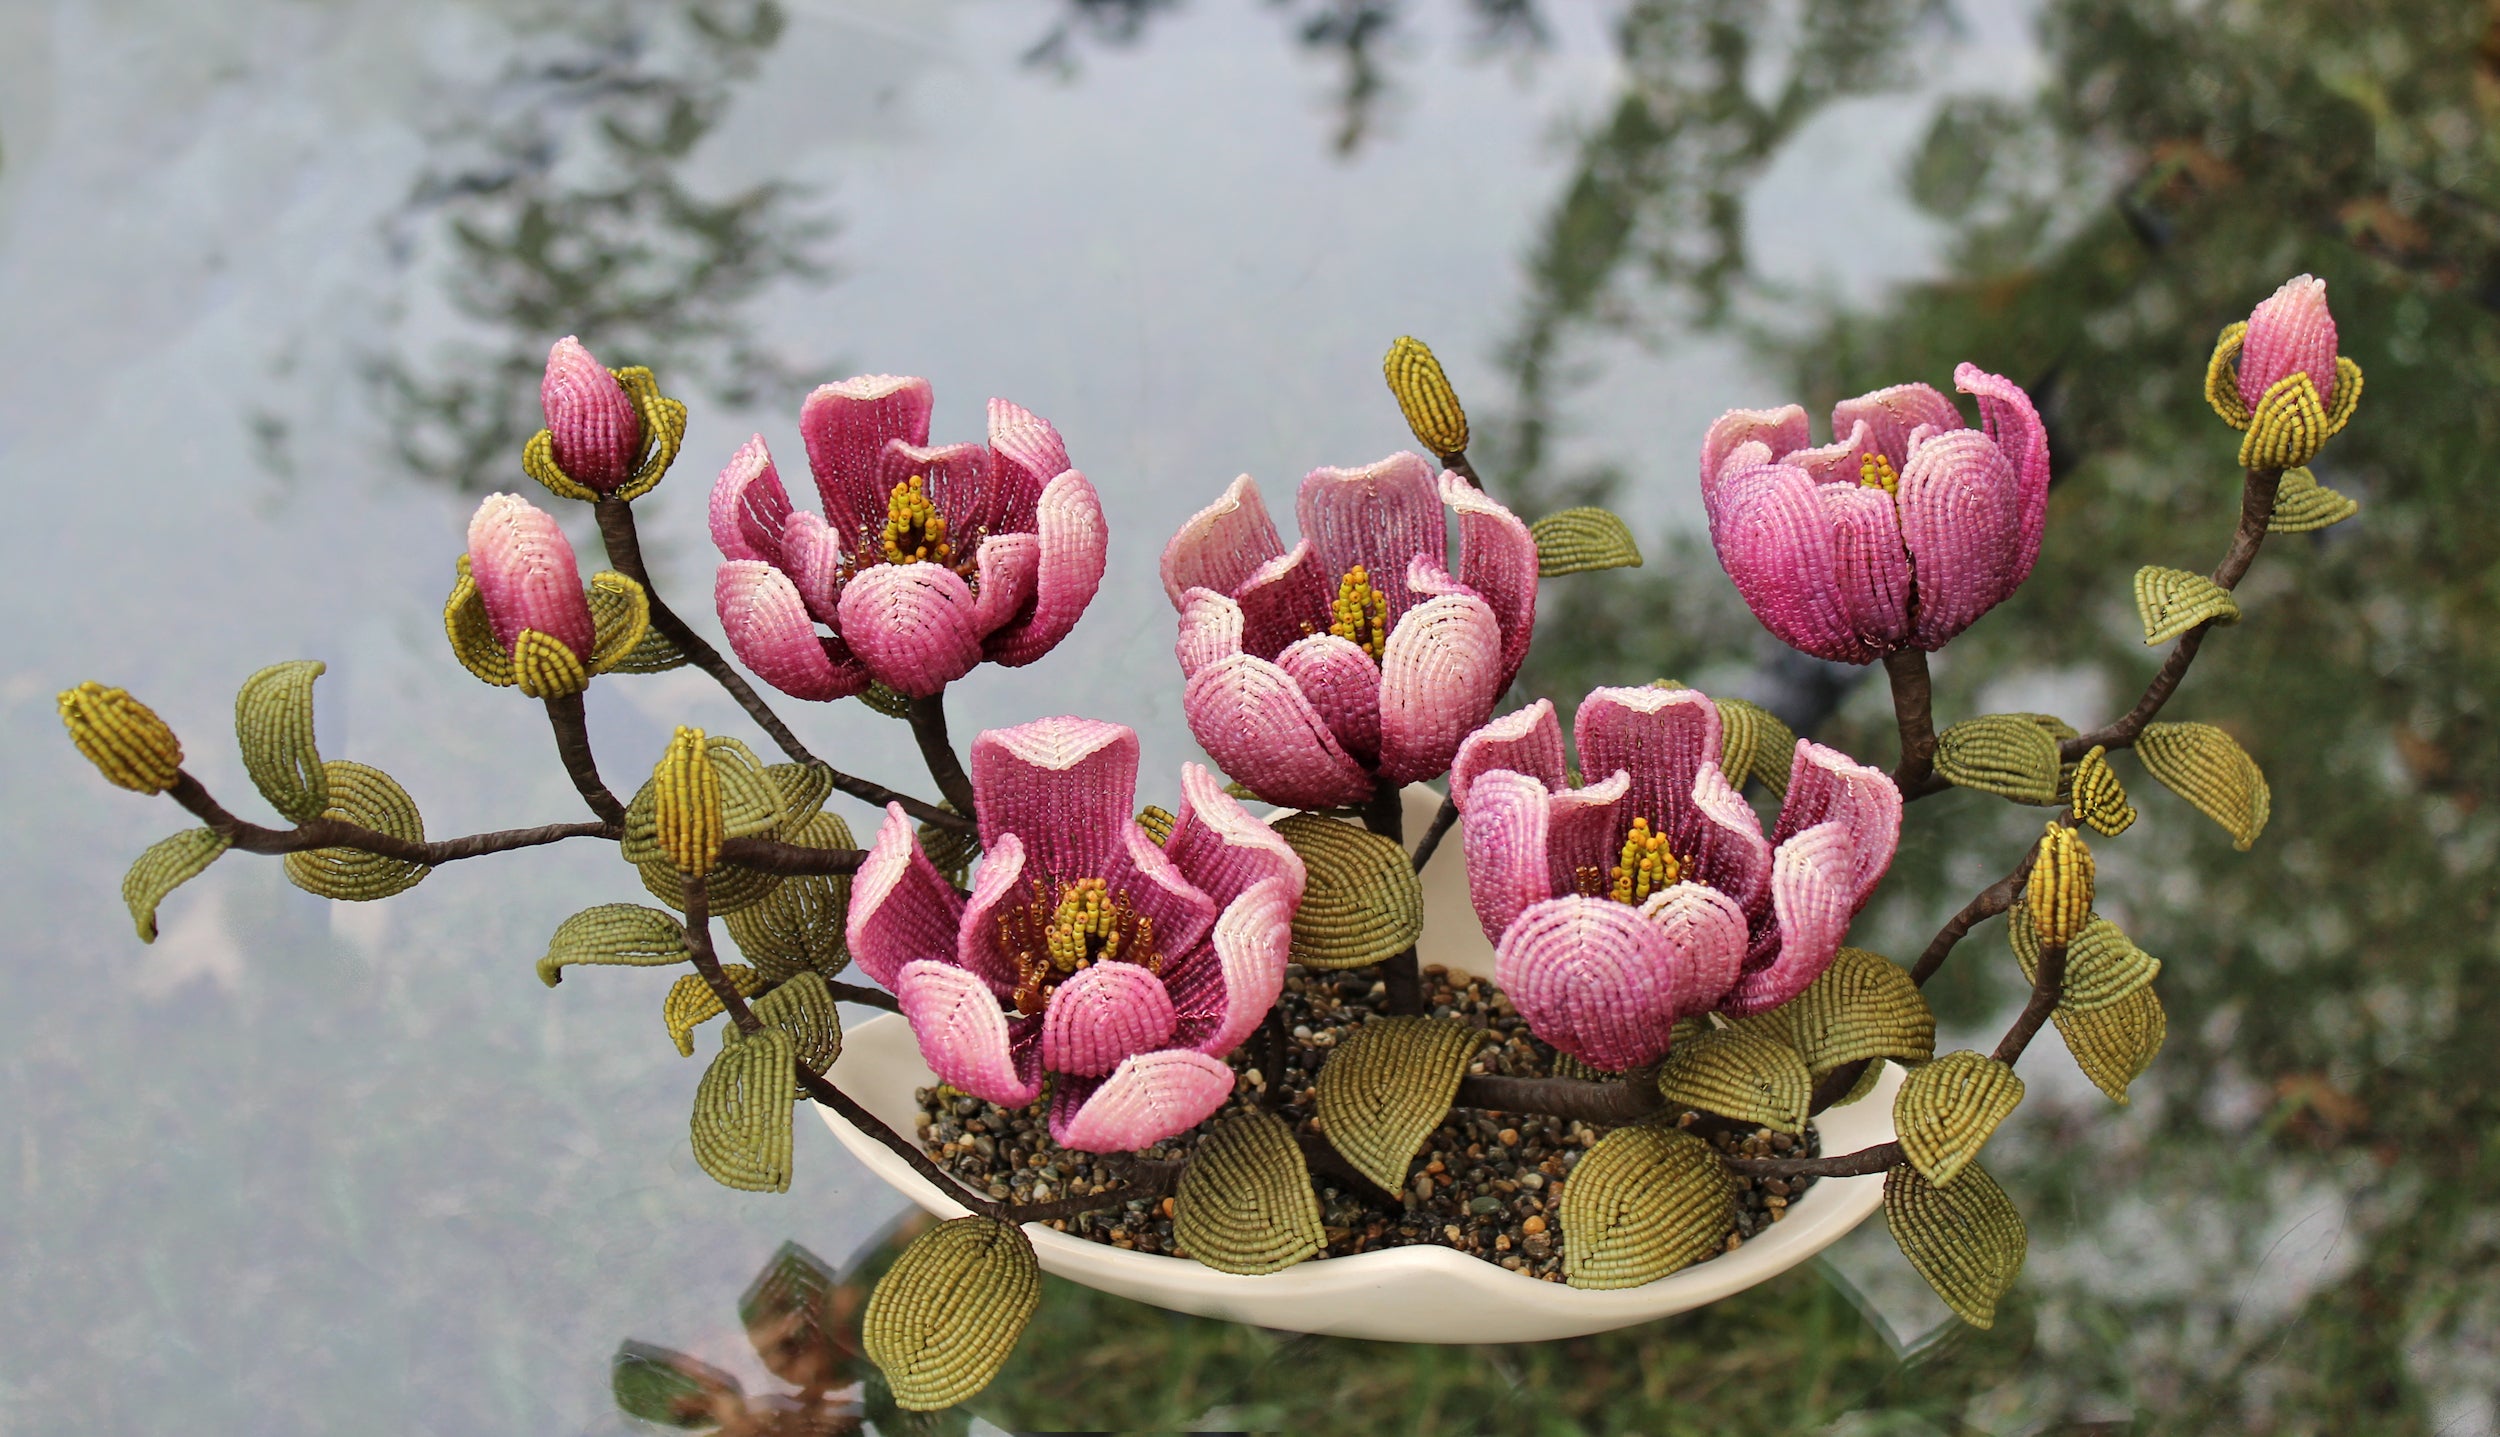 Joan Crawford (Hand Painted Saucer Magnolia Branches) - SOLD